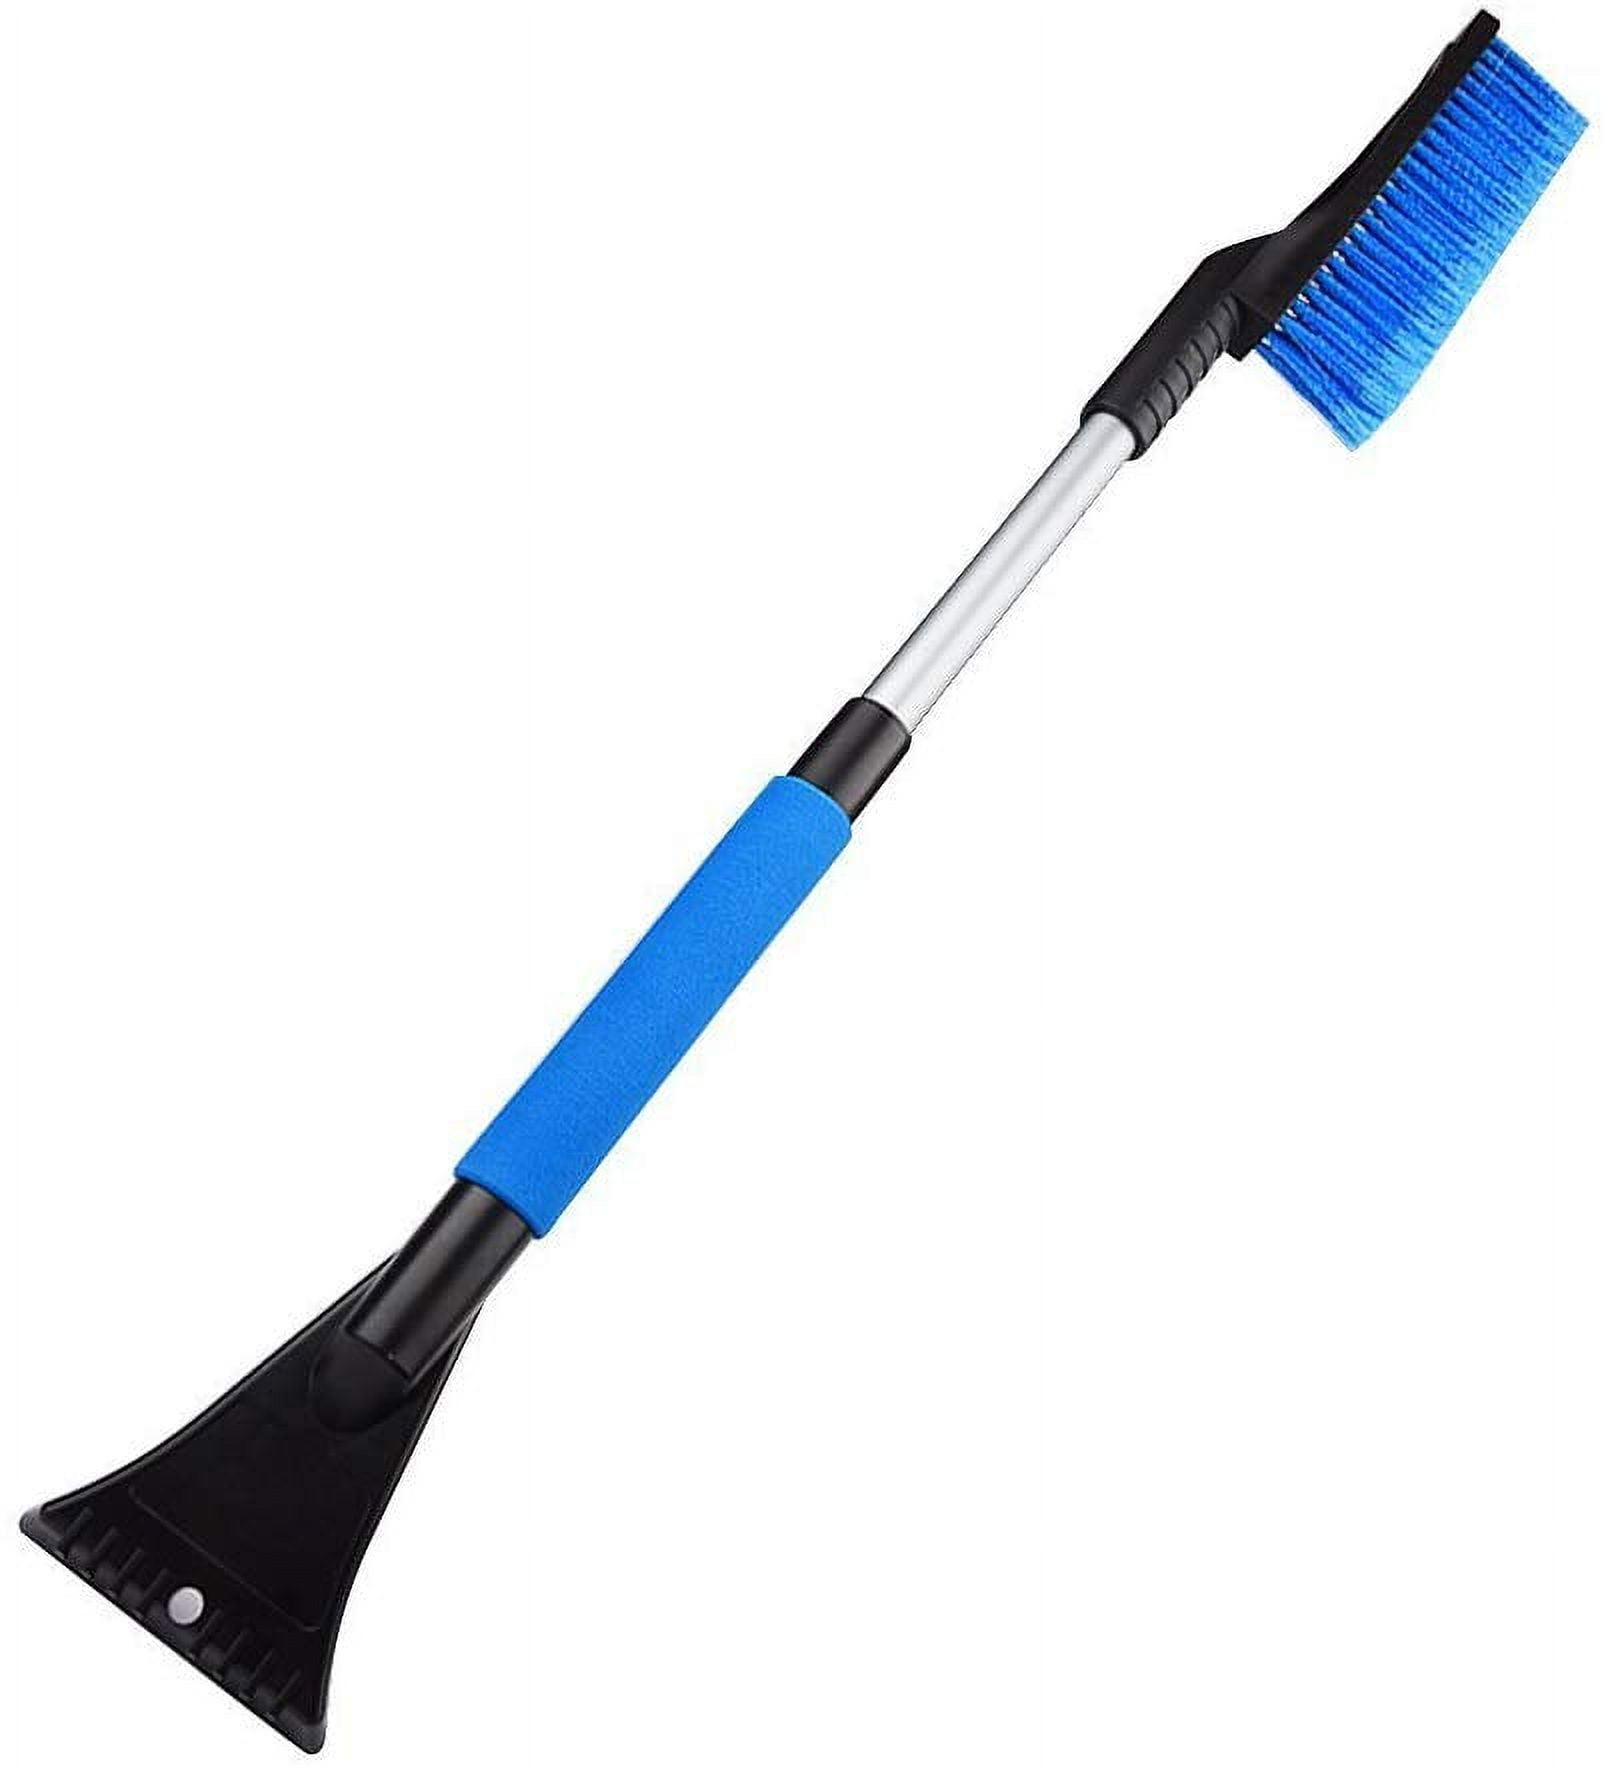 Superio Extendable Snow Brush with Ice Scraper and Squeegee